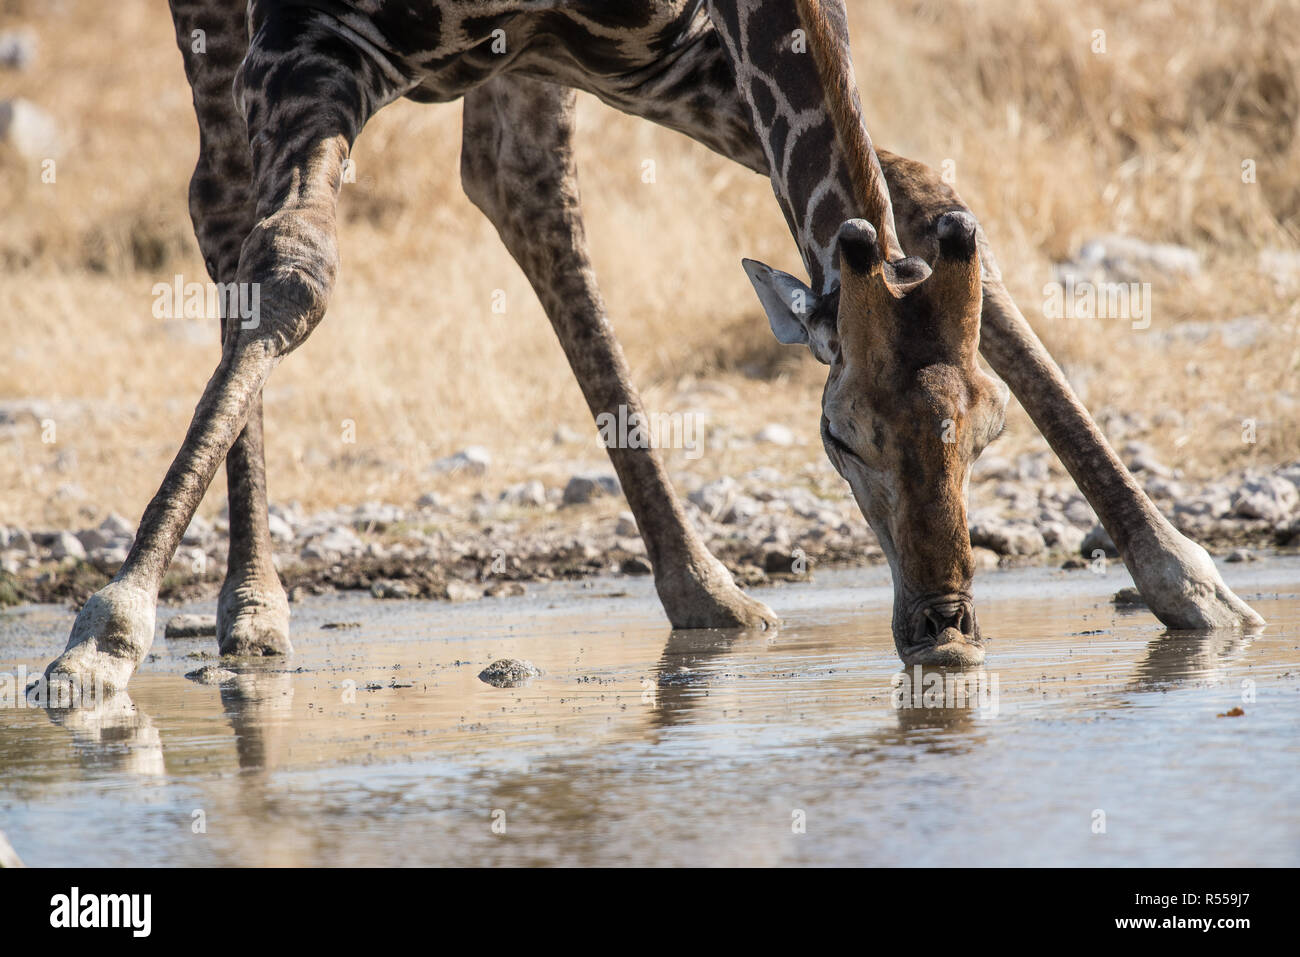 Close up Picture of a giraffe drinking at a waterhole Stock Photo